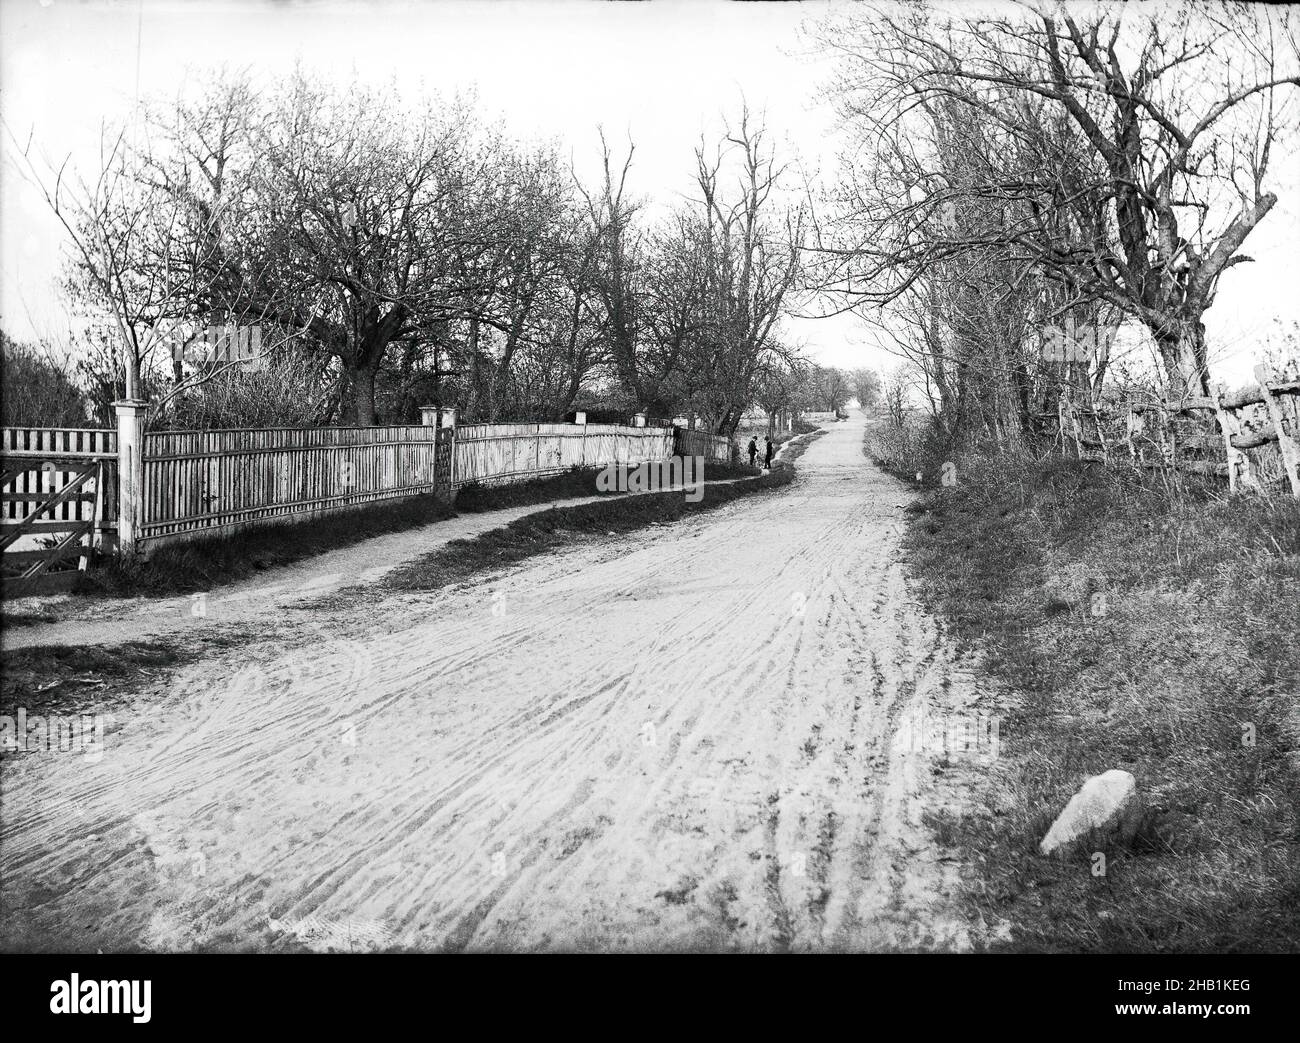 Neck Road at Conover's near Avenue V, Gravesend, Brooklyn, Daniel Berry Austin, American, born 1863, active 1899-1909, Gelatin silver glass dry plate negative, October 1899, archival photograph, dirt road, documentary photography, early photojournalism, historic Brooklyn, historic New York, lane, Neck road, New York City, old Brooklyn, old New York, picket fence, rural, vintage photograph Stock Photo